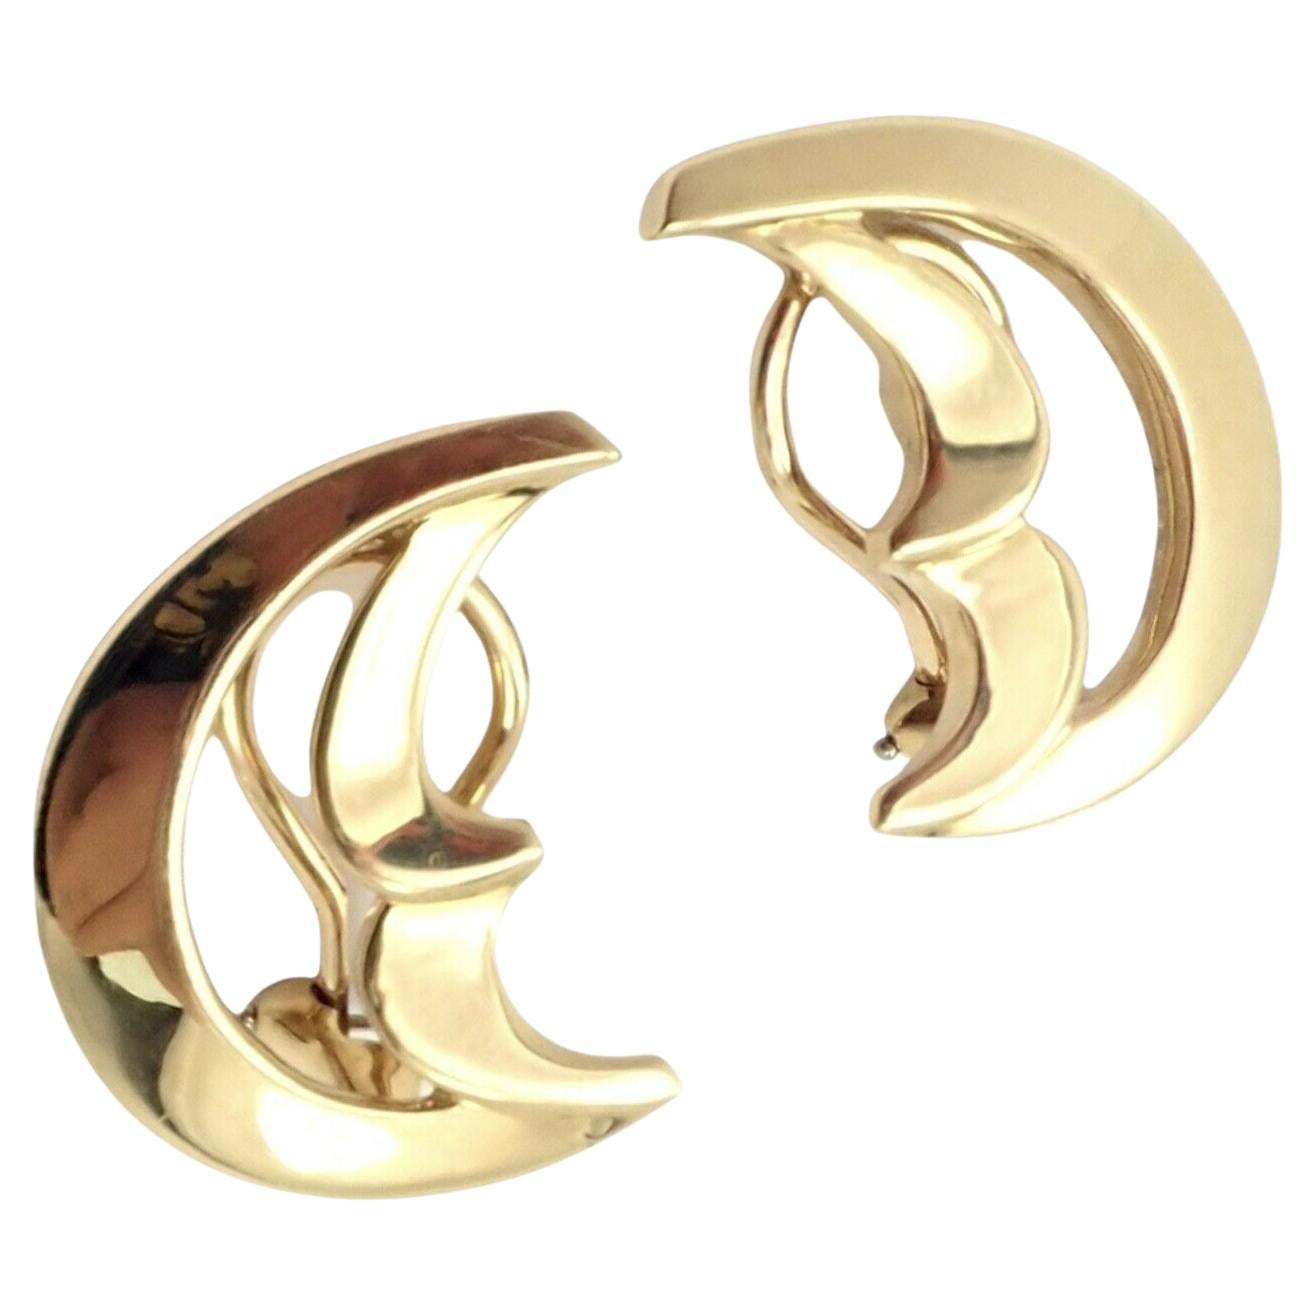 Crescent Moon Earrings - LG - made to order – Epilith Jewelry